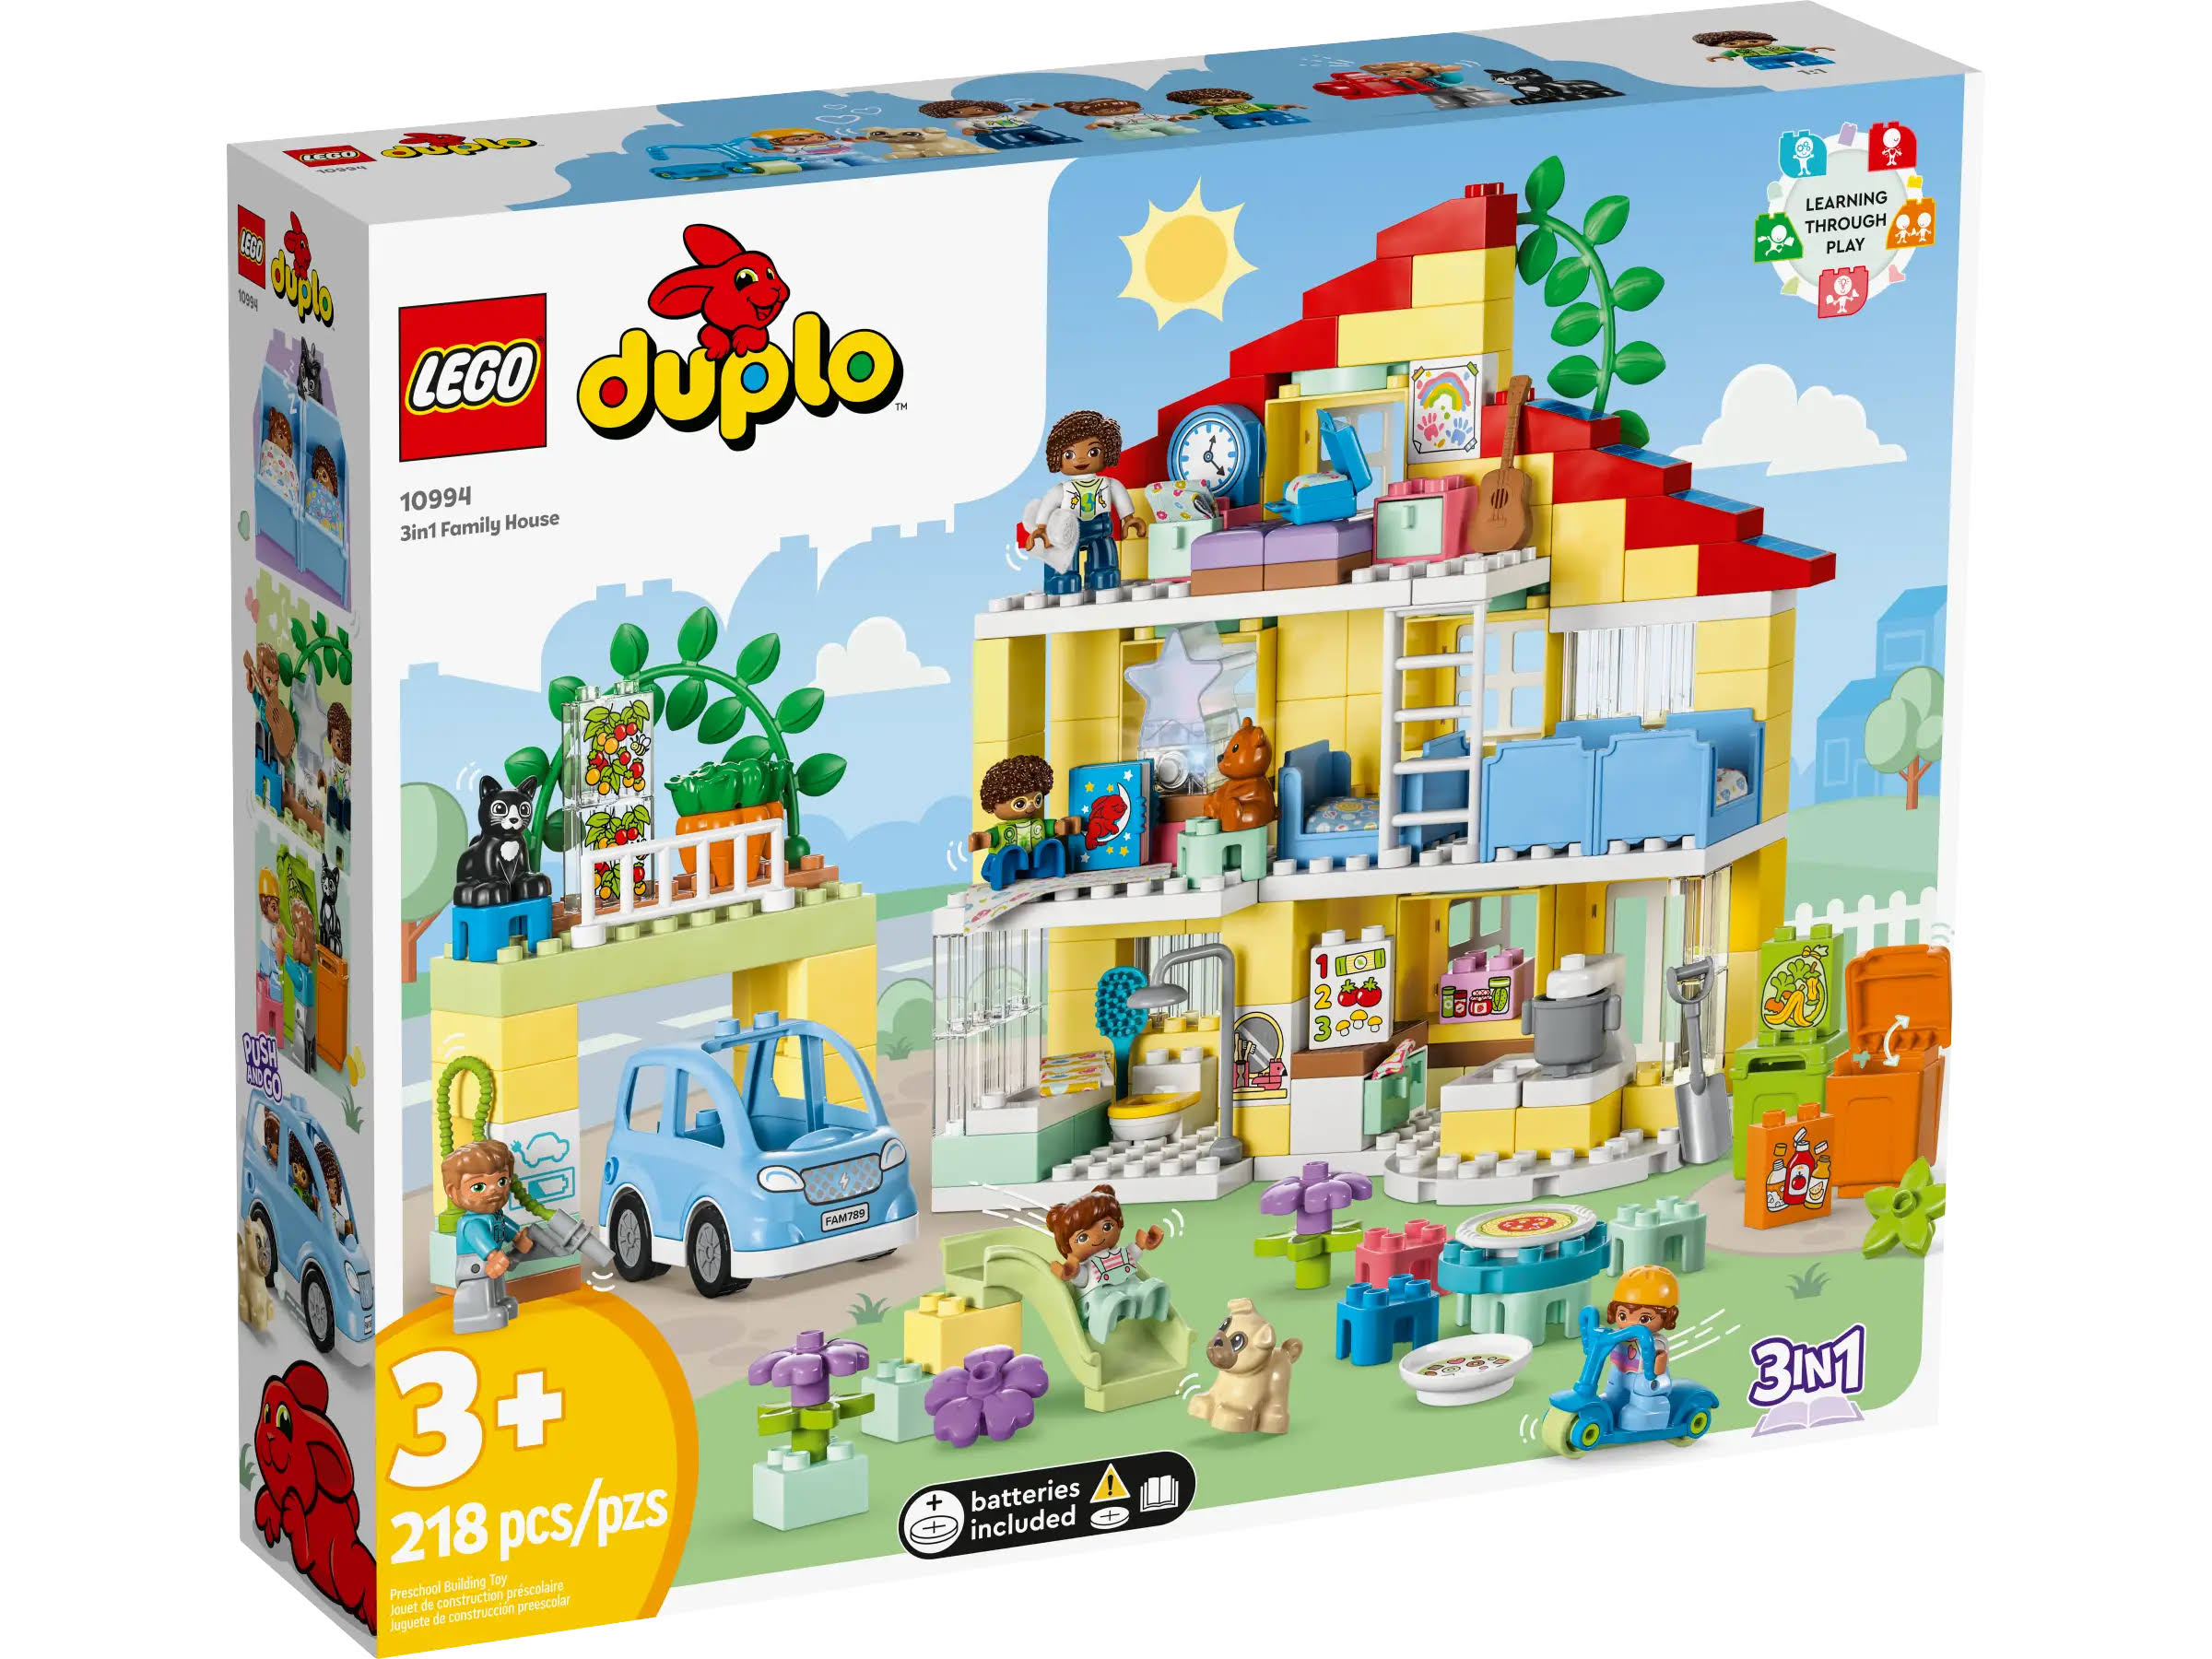 Lego Duplo Town 3-in-1 Family House 10994 Building Set